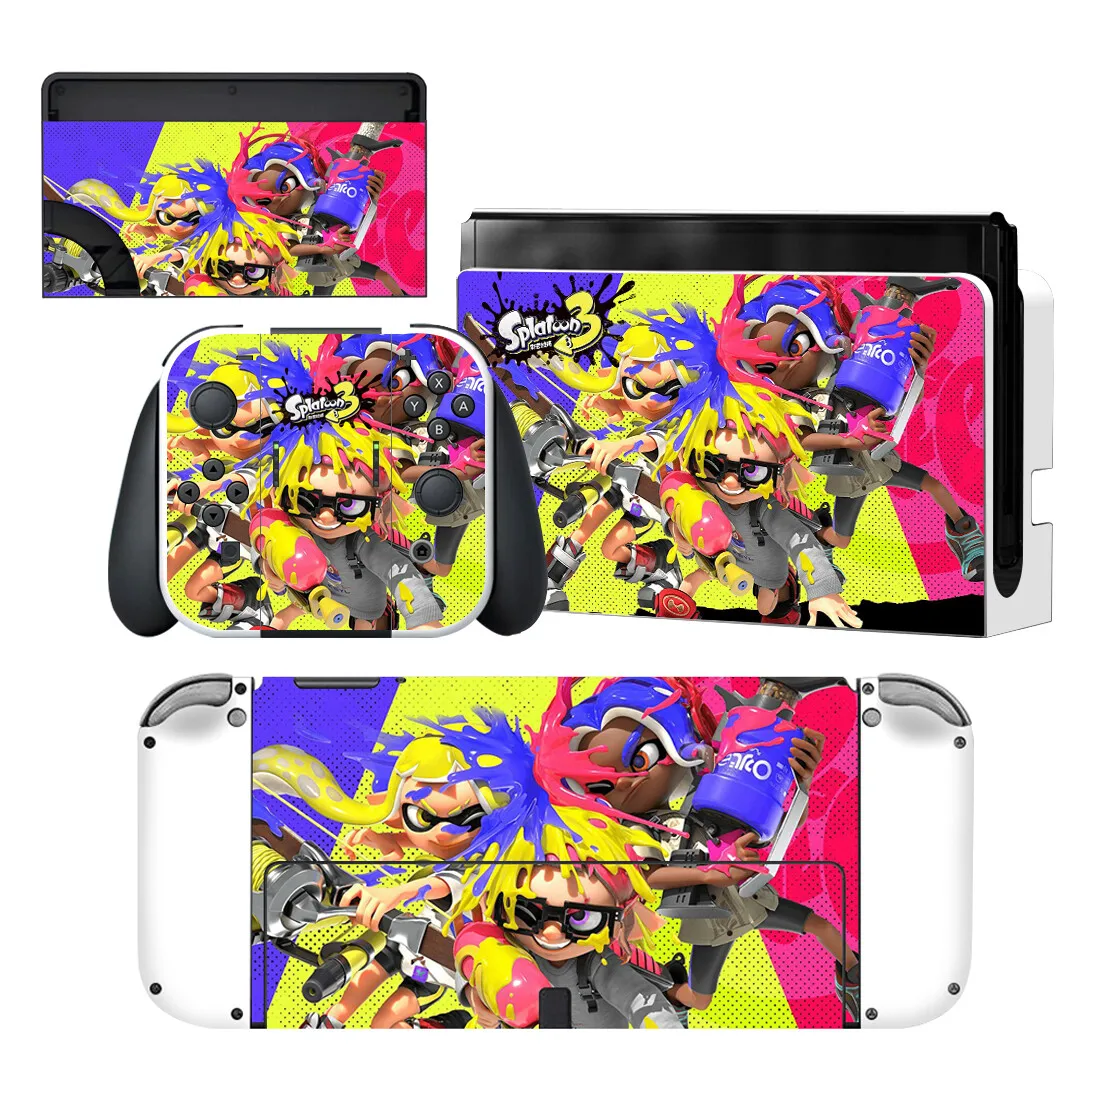 

Splatoon 3 Nintendoswitch Skin Cover Sticker Decal for Nintendo Switch OLED Console Joy-con Controller Dock Skin Vinyl